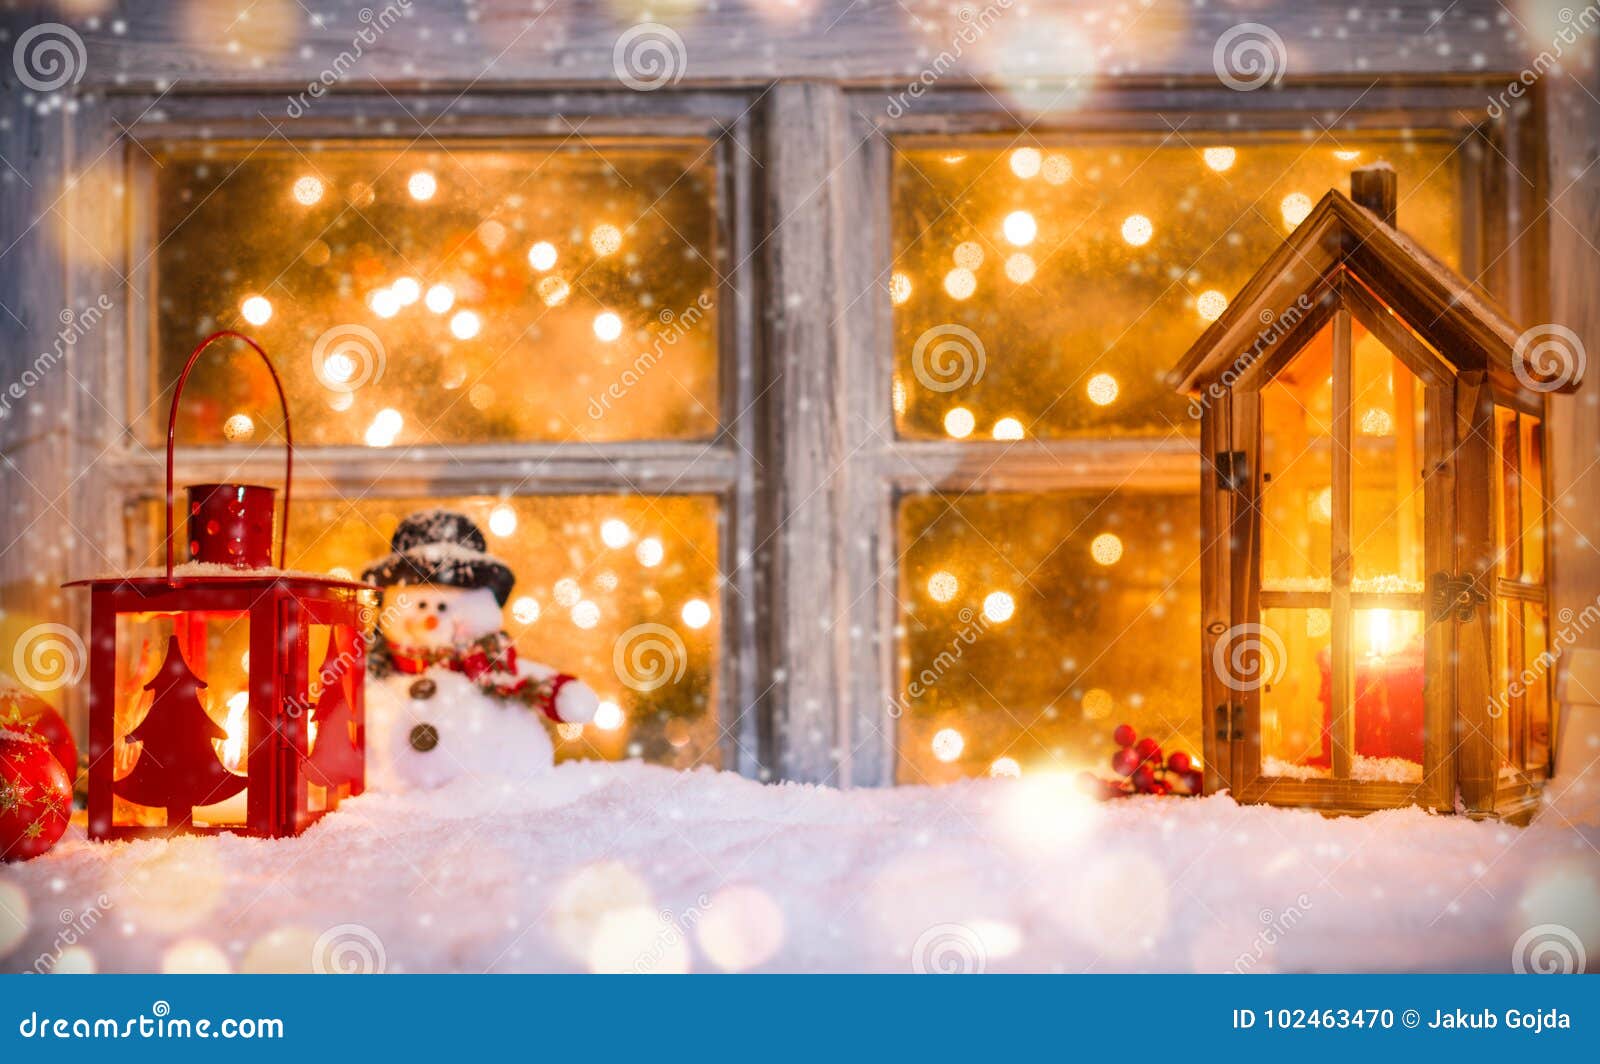 Christmas Still Life with Old Wooden Window Stock Photo - Image of ...